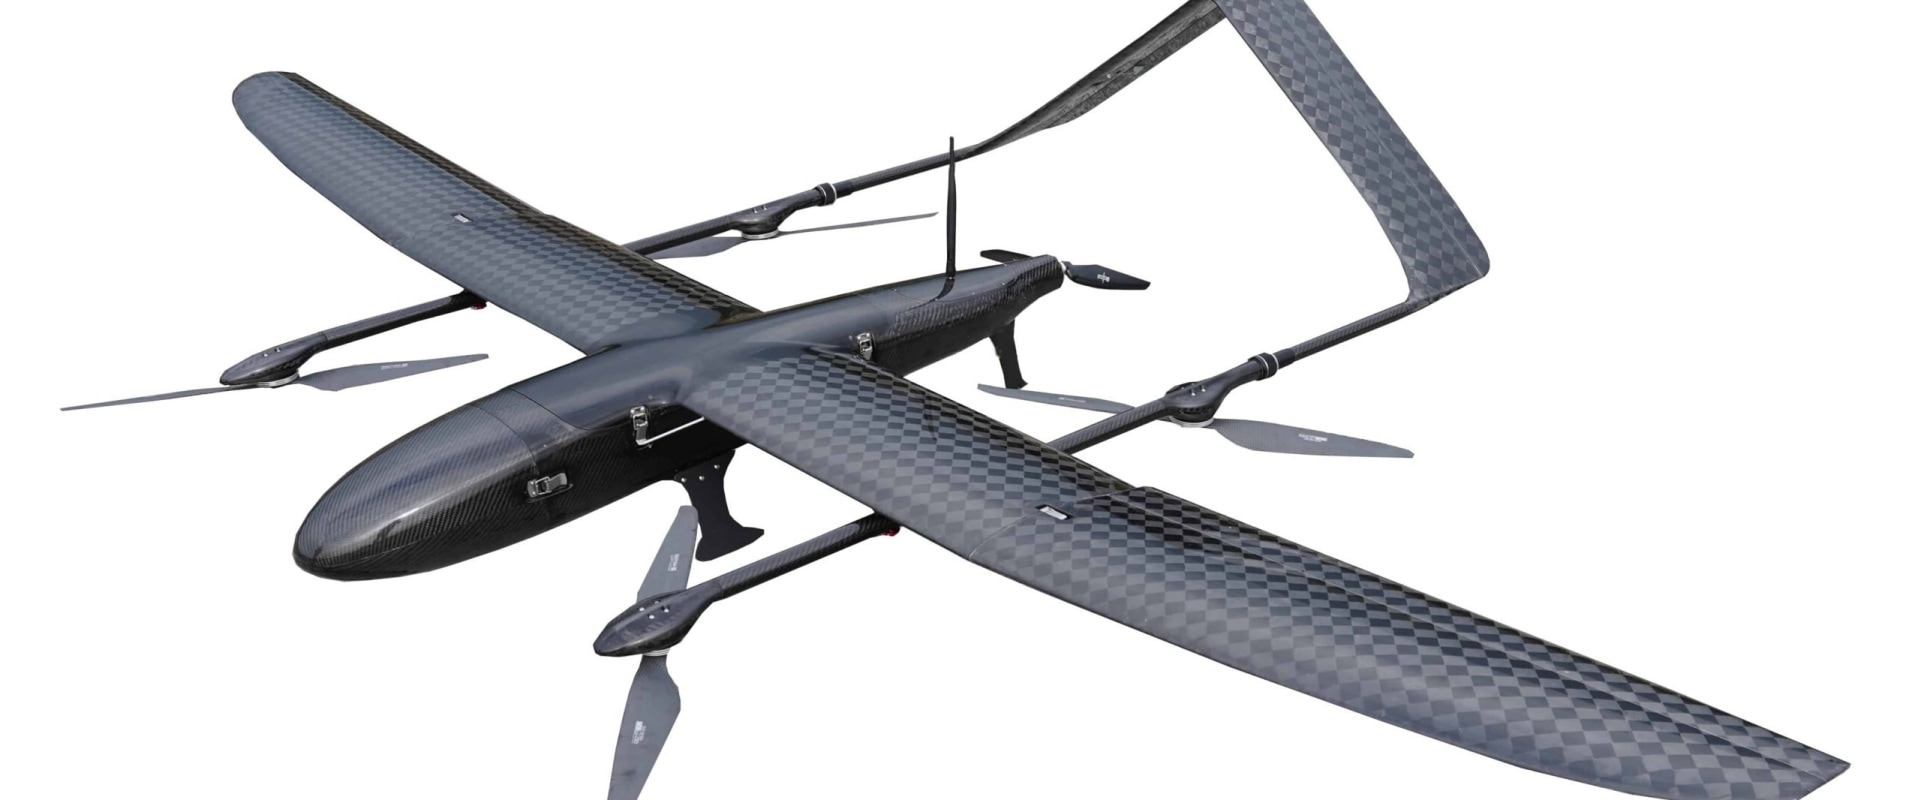 Explore Ready-to-Fly Fixed-Wing Drones